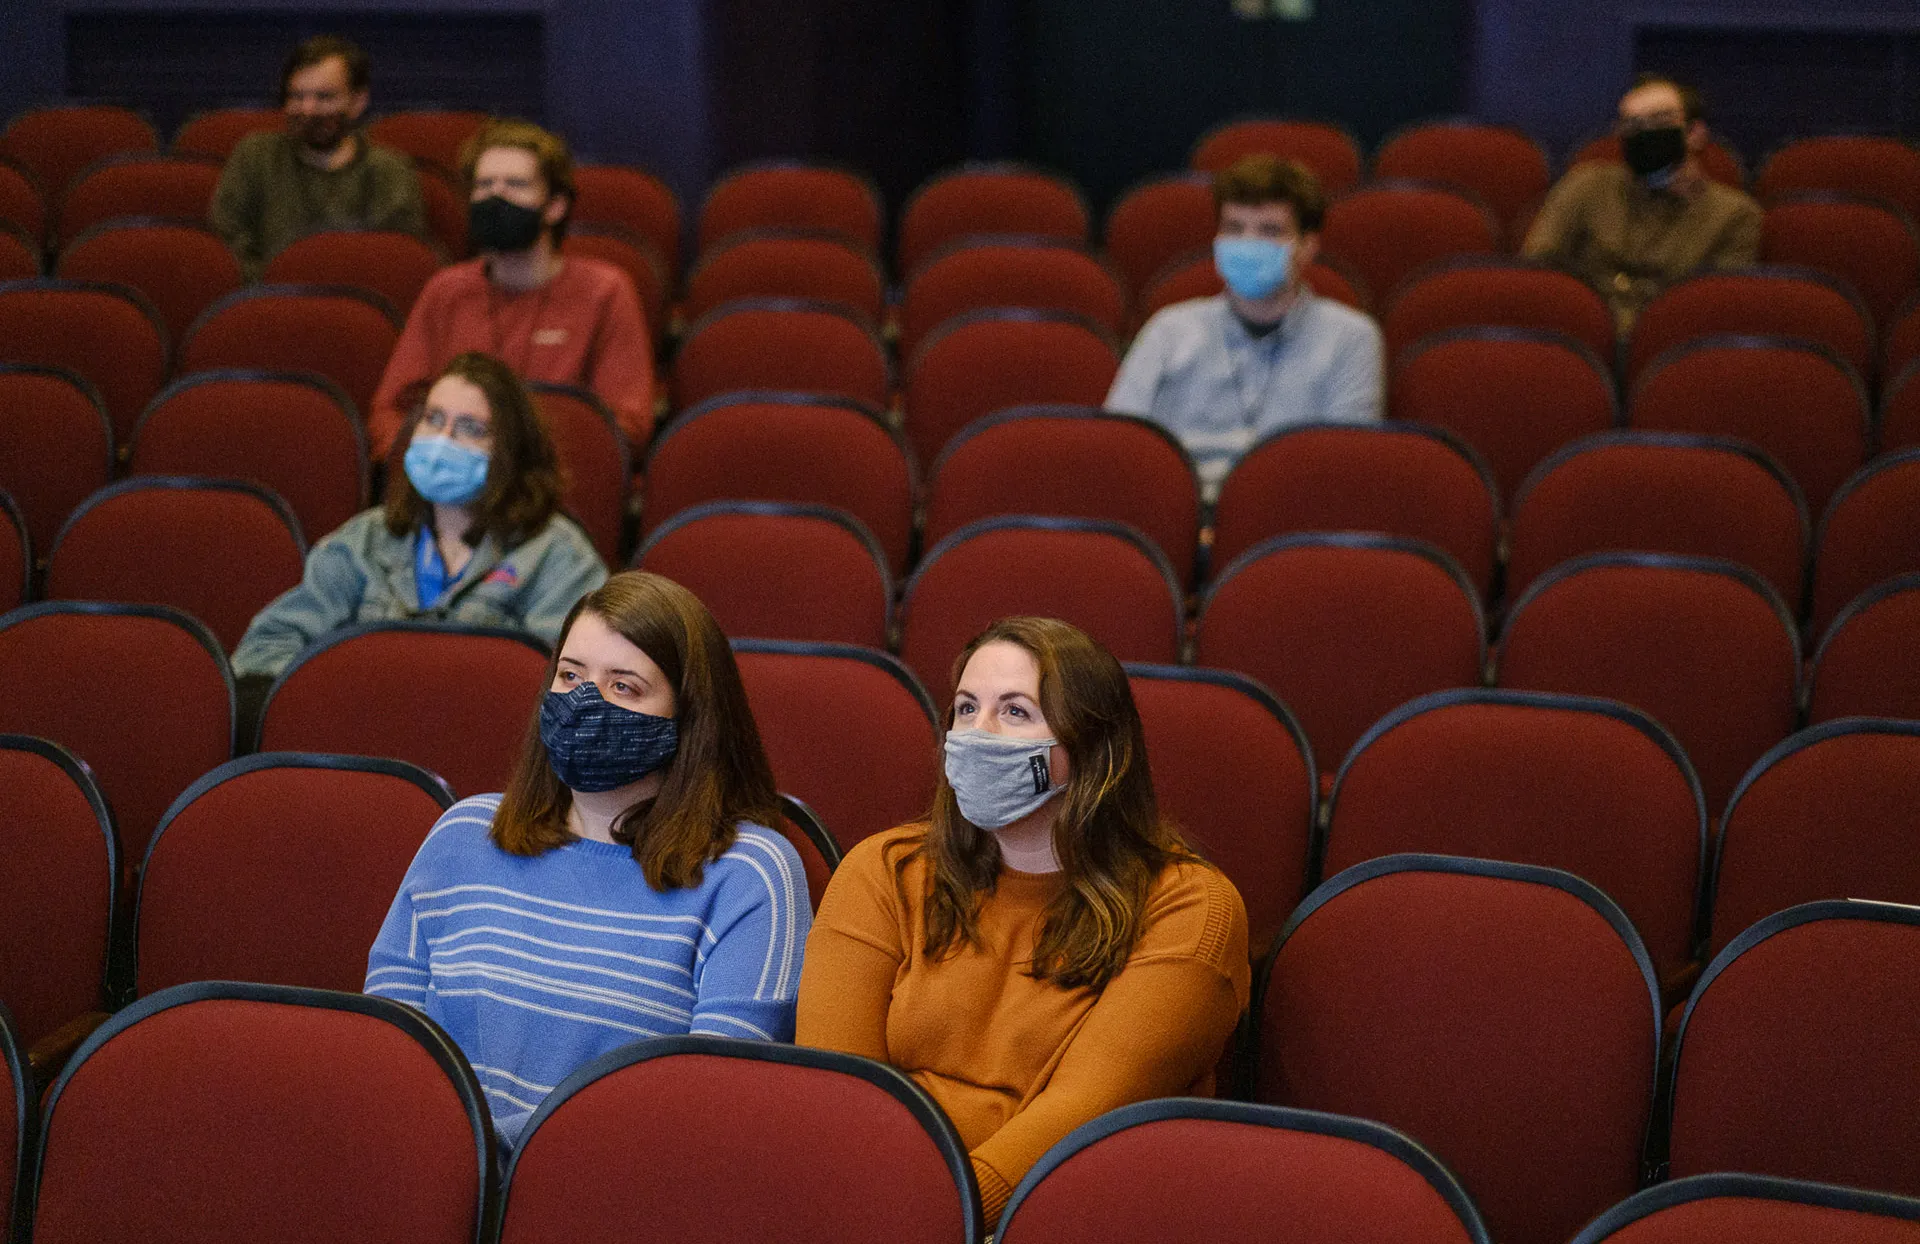 Seven adults wearing face masks sit spaced apart in theater seats 